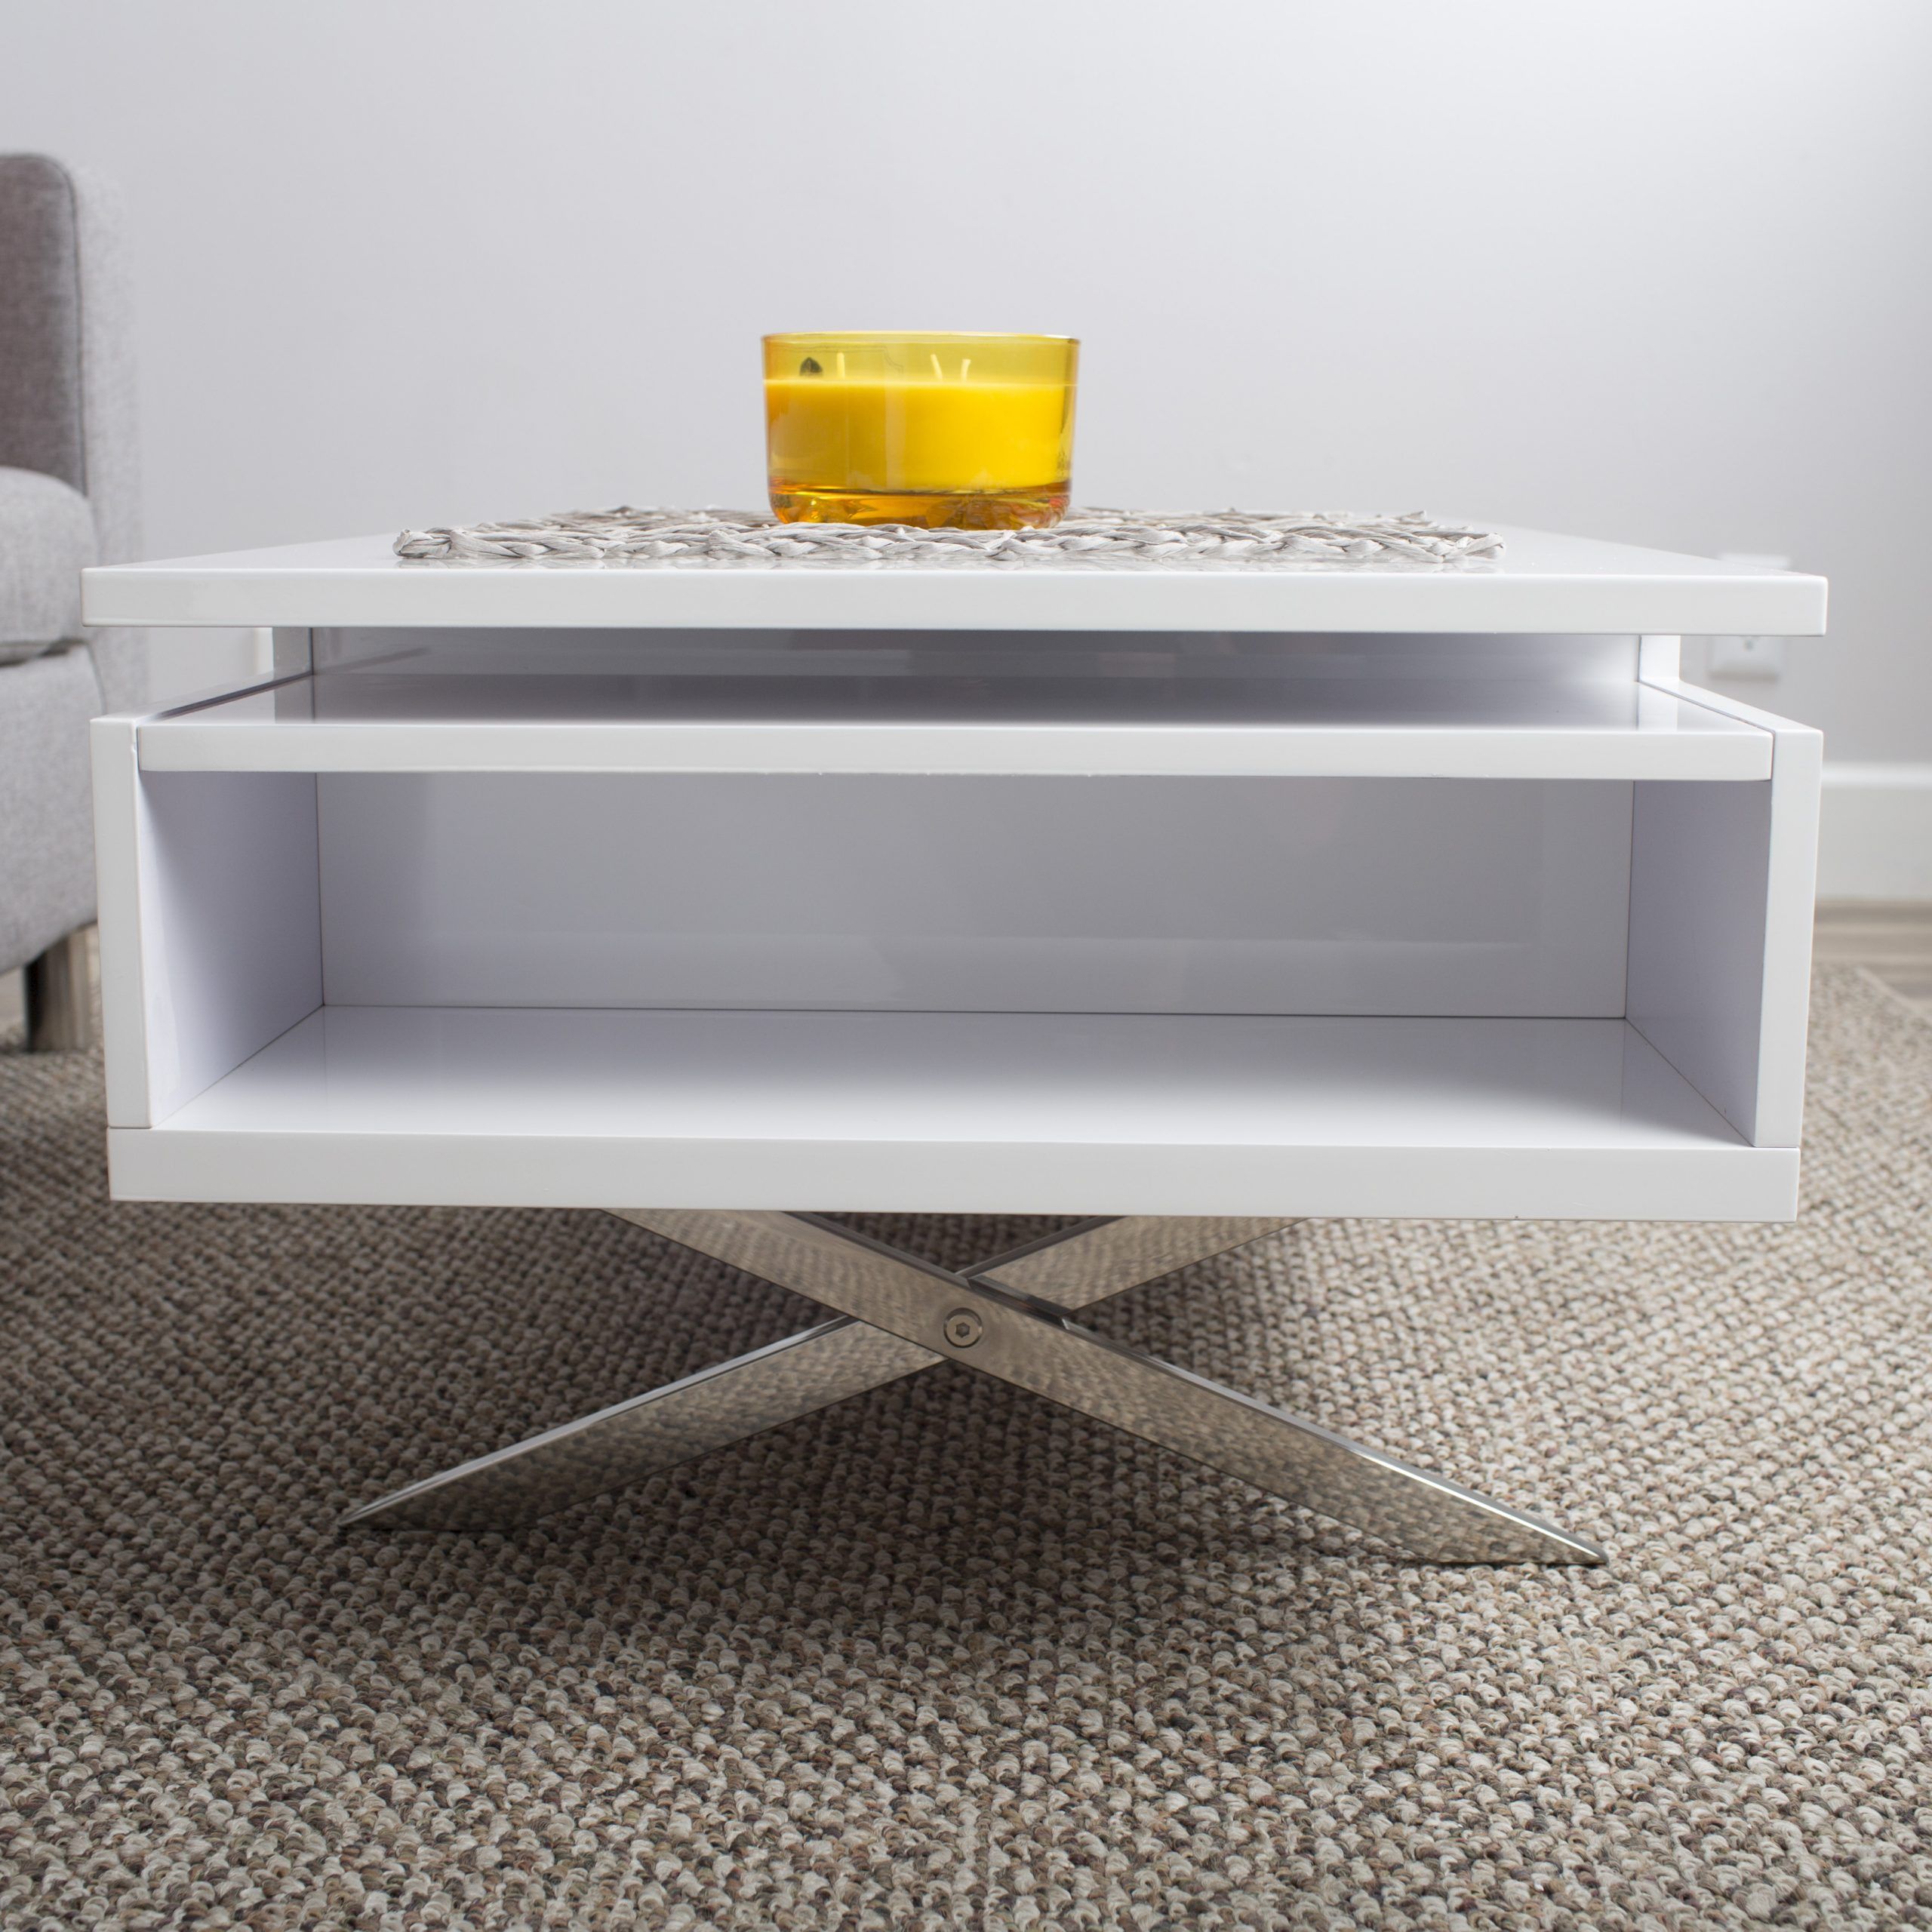 Gloss White Steel Coffee Tables Within Famous Stelar White Lacquer High Gloss Lift Top Rectangular (View 19 of 20)